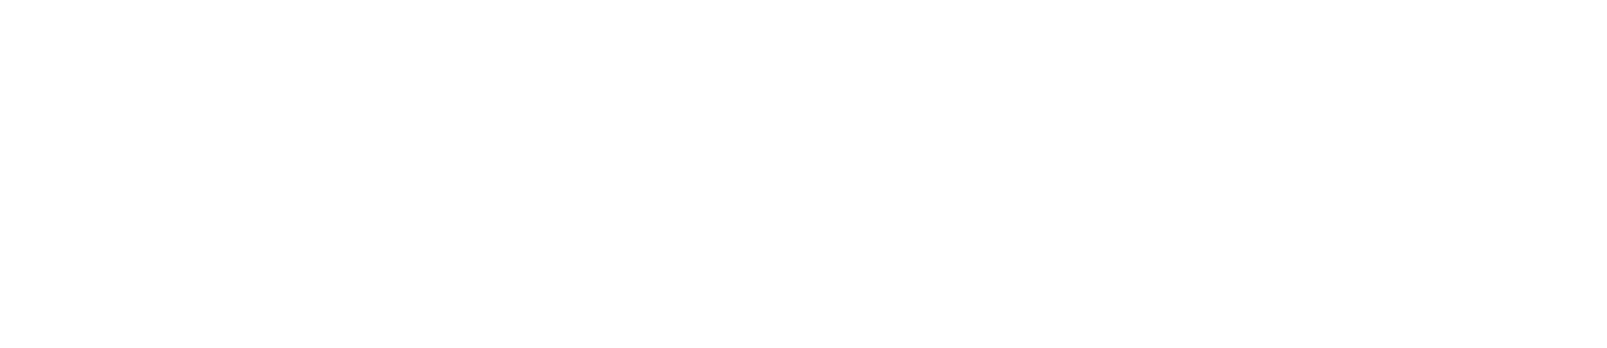 Citycon logo large for dark backgrounds (transparent PNG)